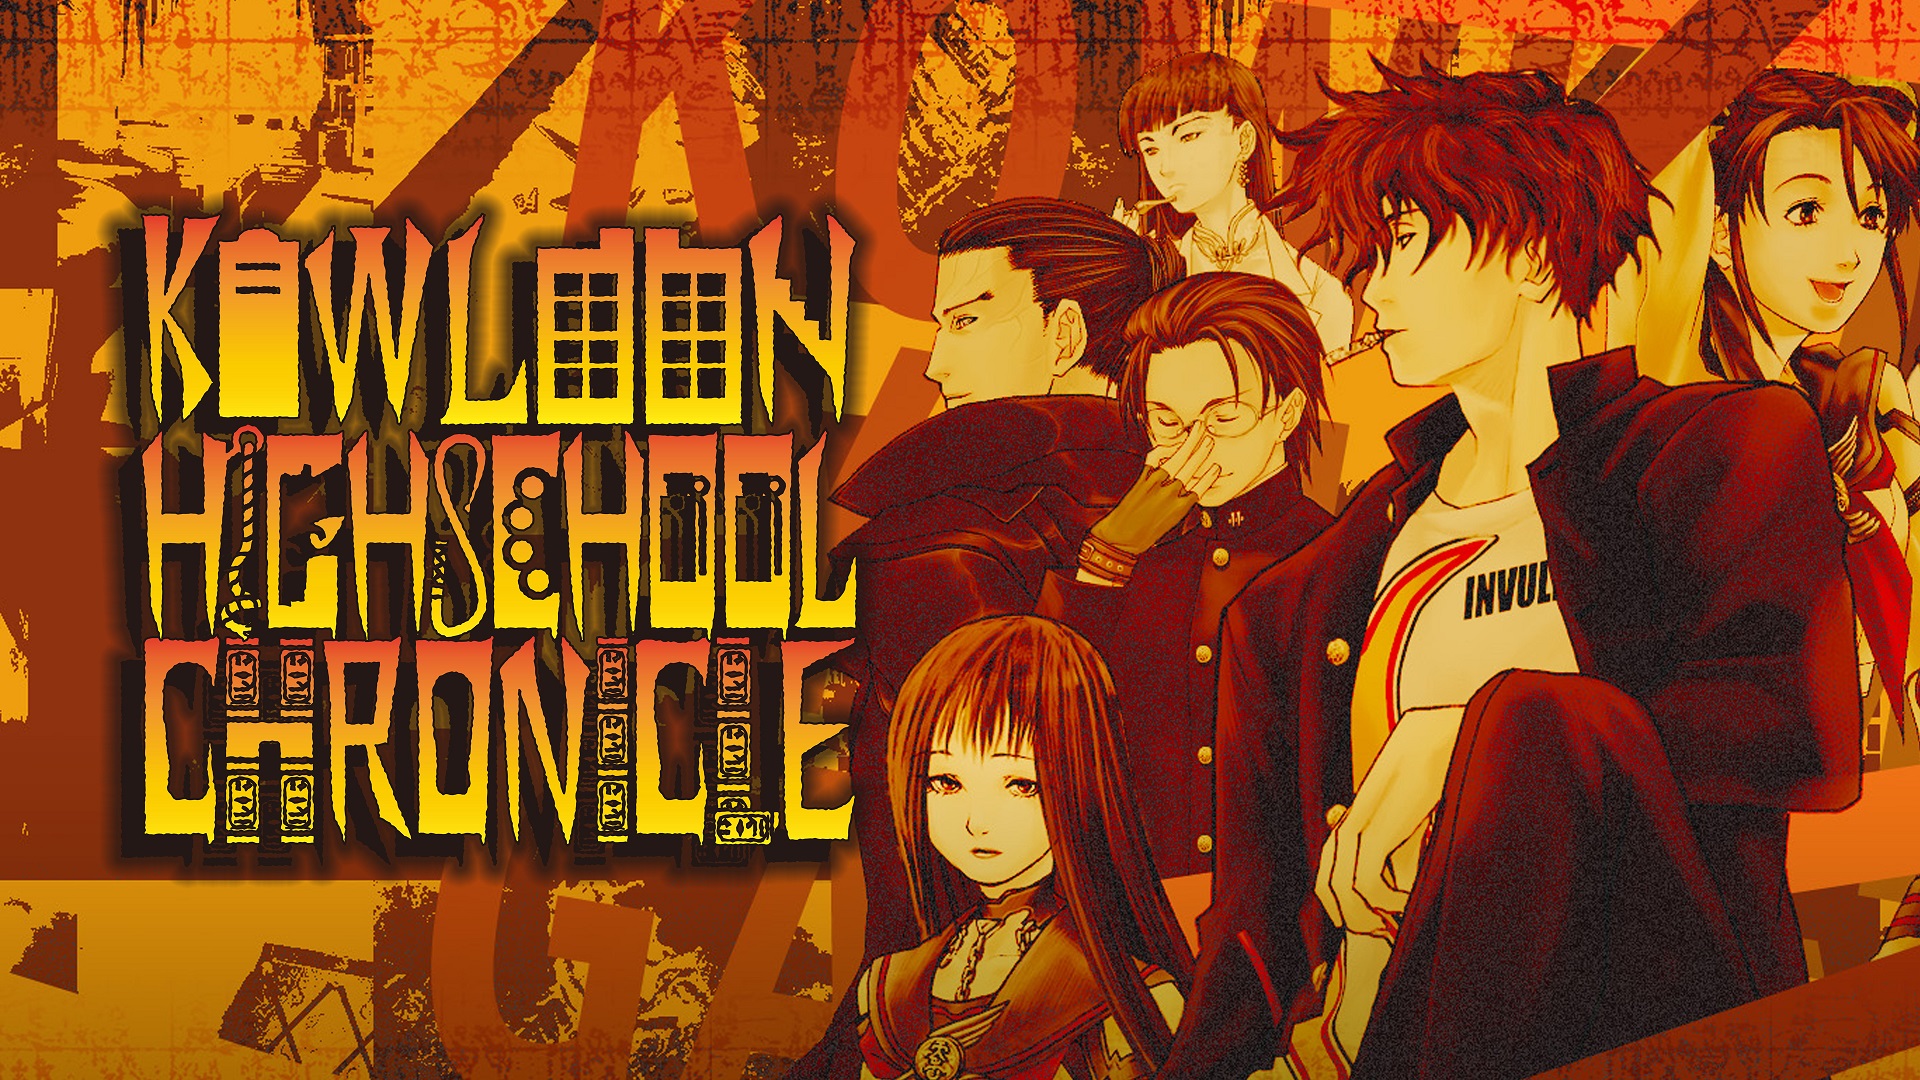 Kowloon Highschool Chronicle PS4 port is coming to North America